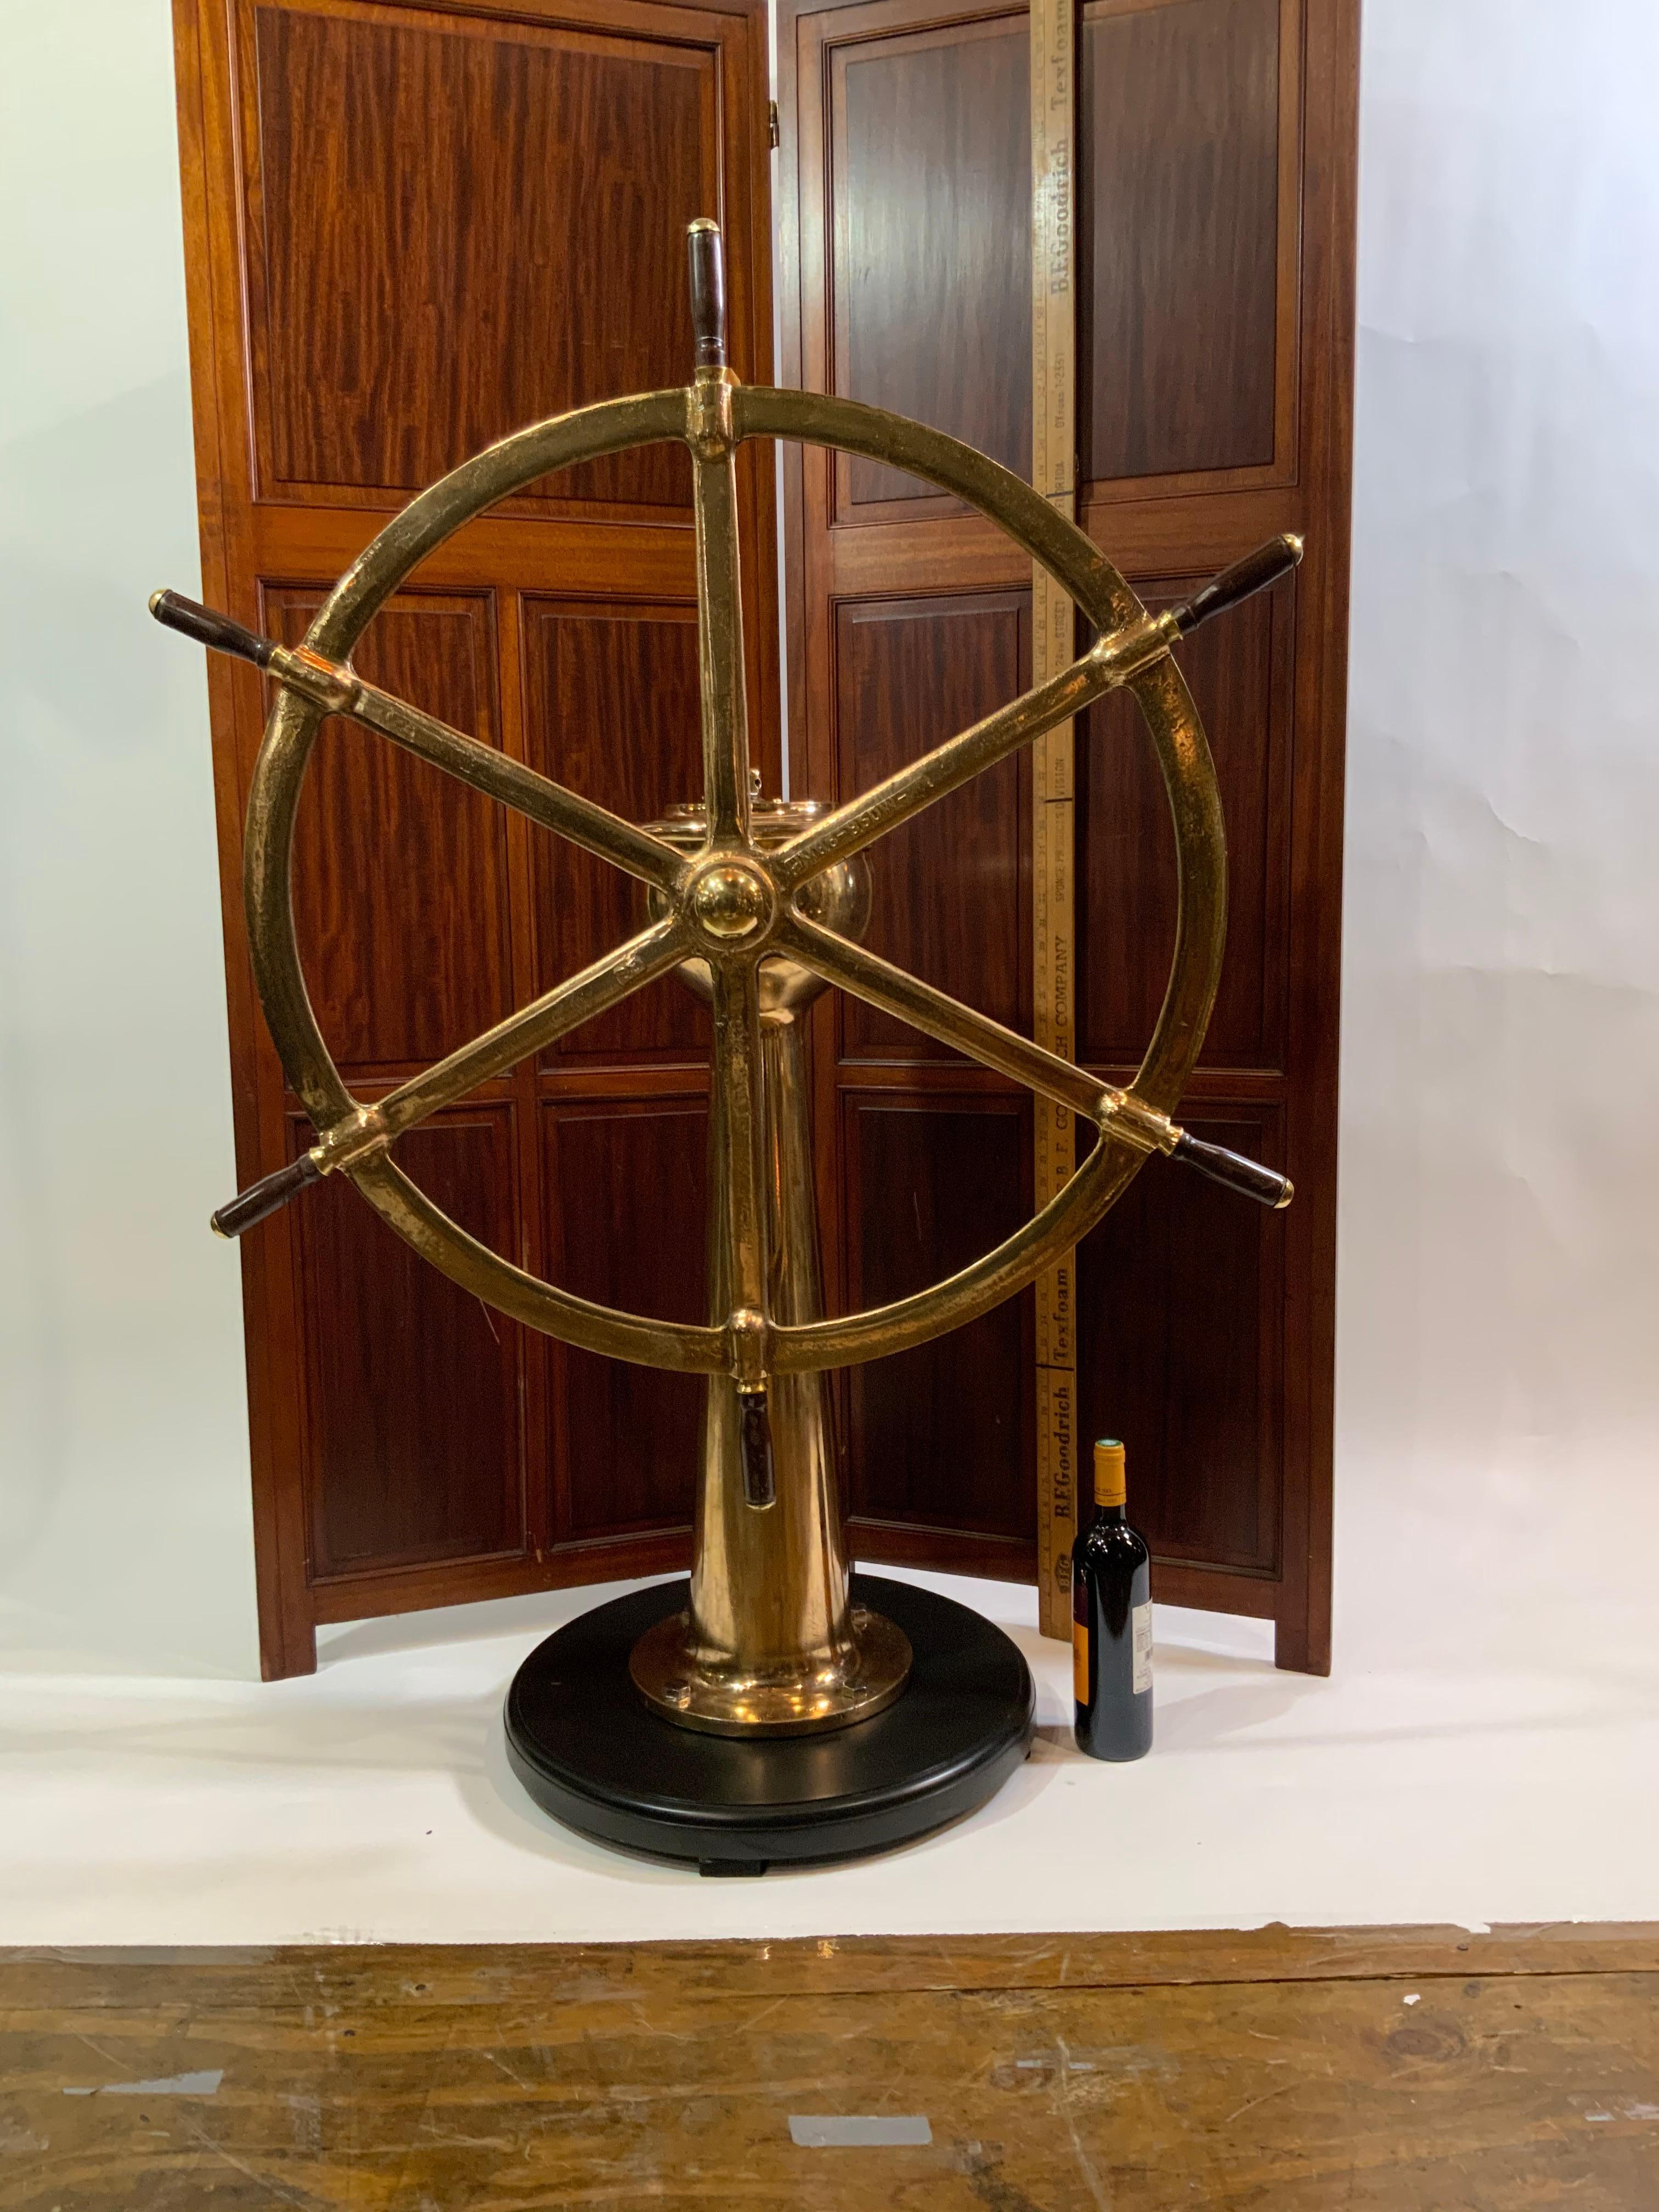 Highly polished and lacquered six spoke ships wheel mounted on its original geared pedestal. Fitted with wood spoke handles and mounted to a thick mahogany base. Weighs 145 pounds. Dimensions are 57 tall and wheel is 41 inch diameter. Price $5295.